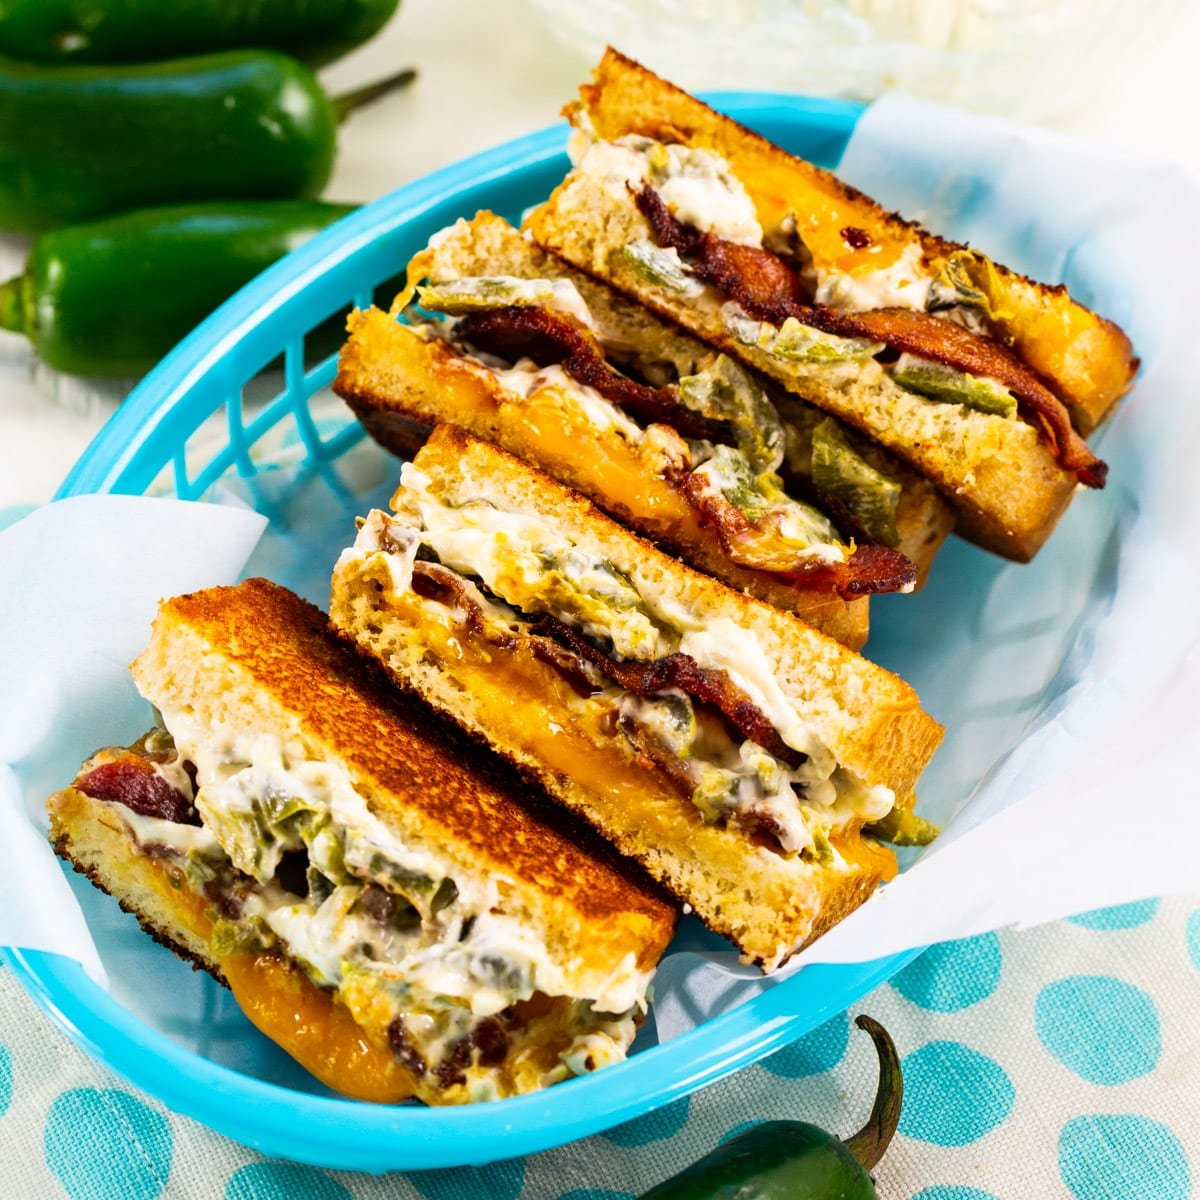 Jalapeno Popper Grilled Cheese in a blue basket.